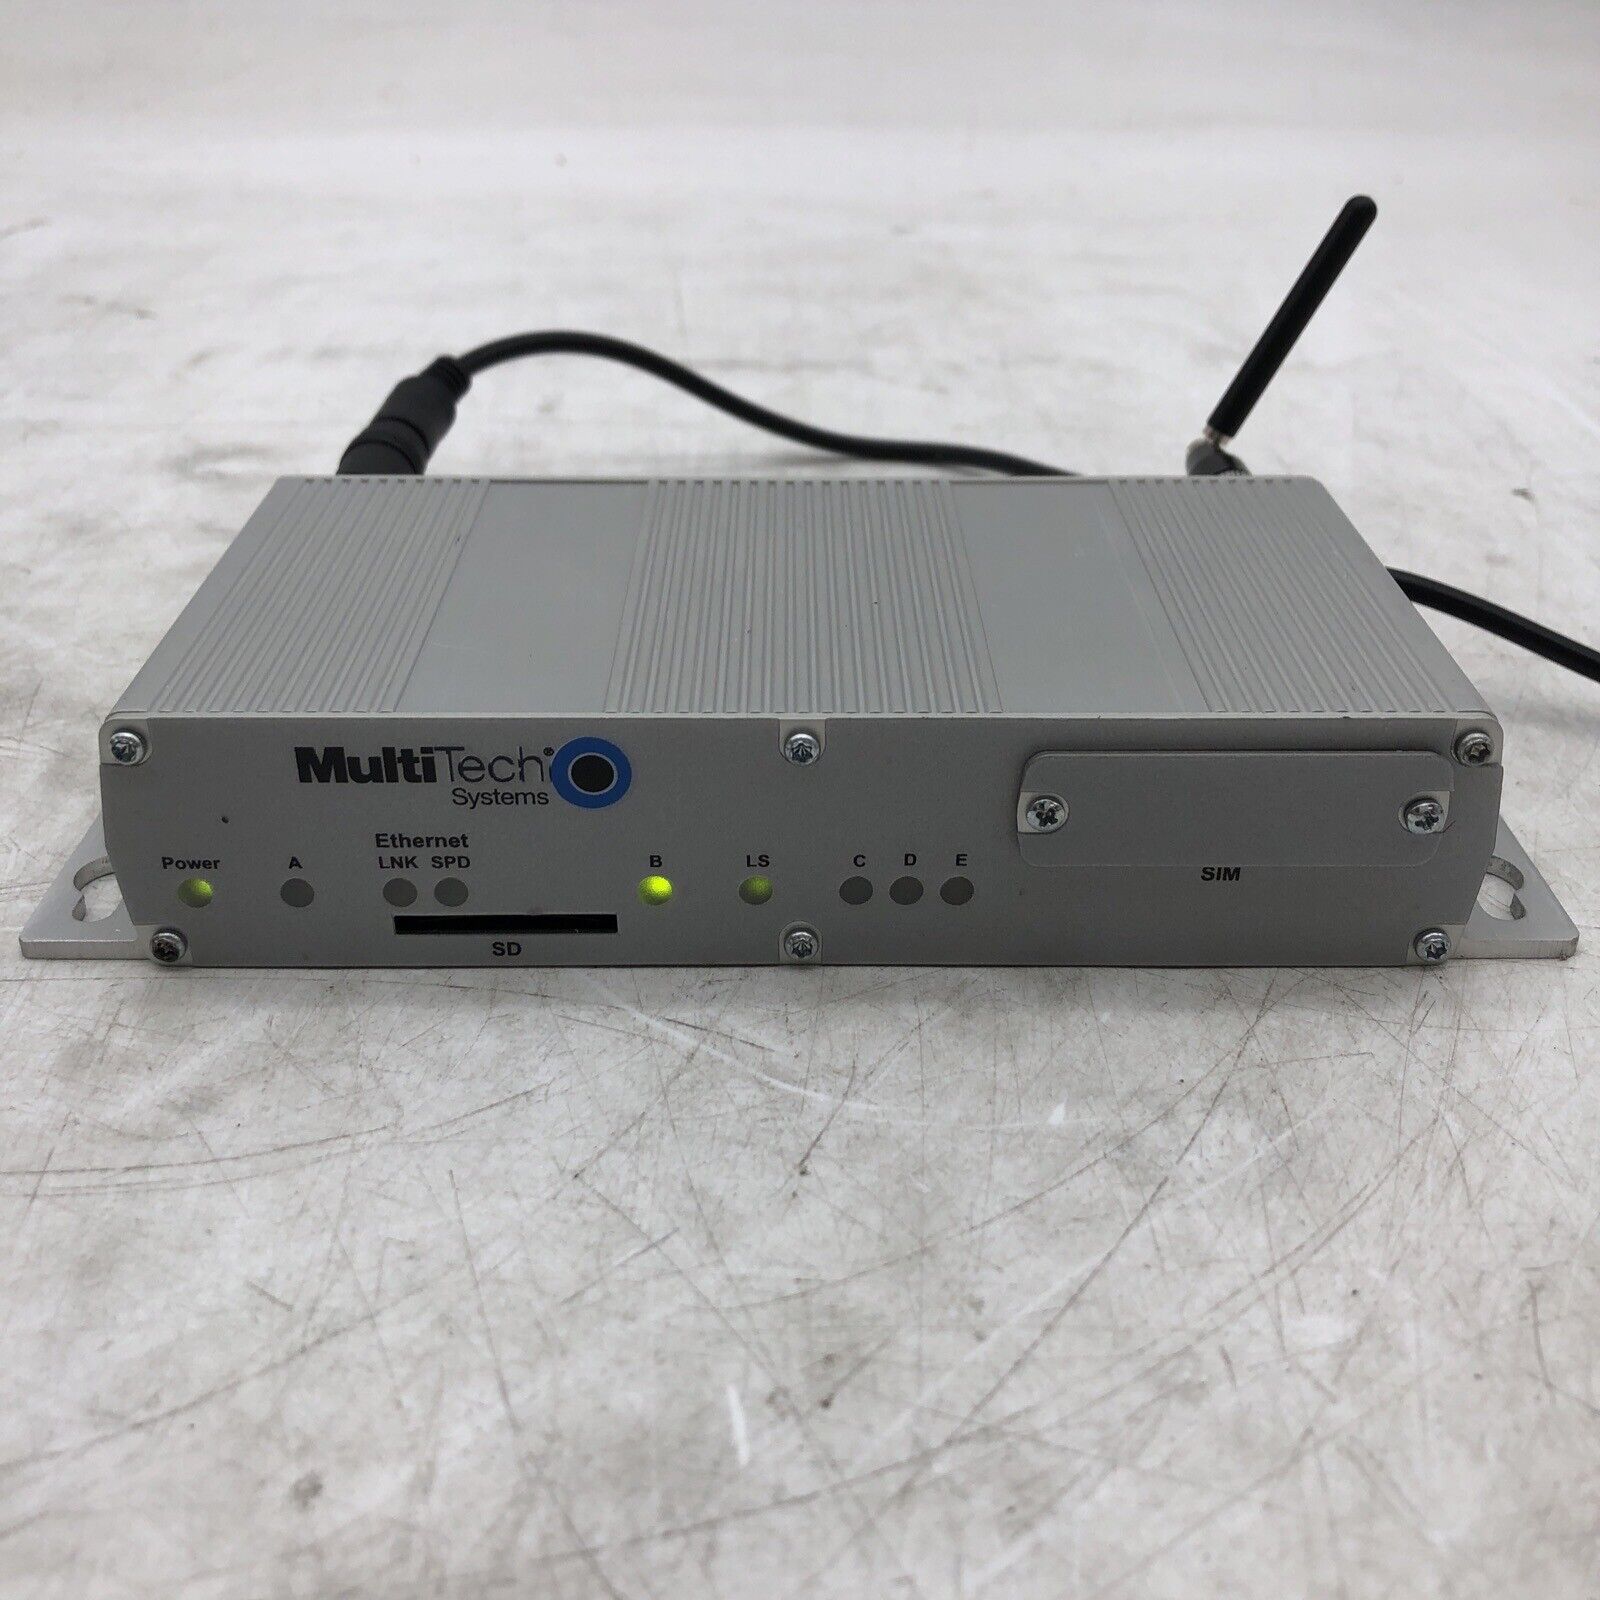 Multi-tech MTCDP-H5 /MTCDP-H5-1.0 Multi Connect Radio Modem TESTED FOR POWER (3)